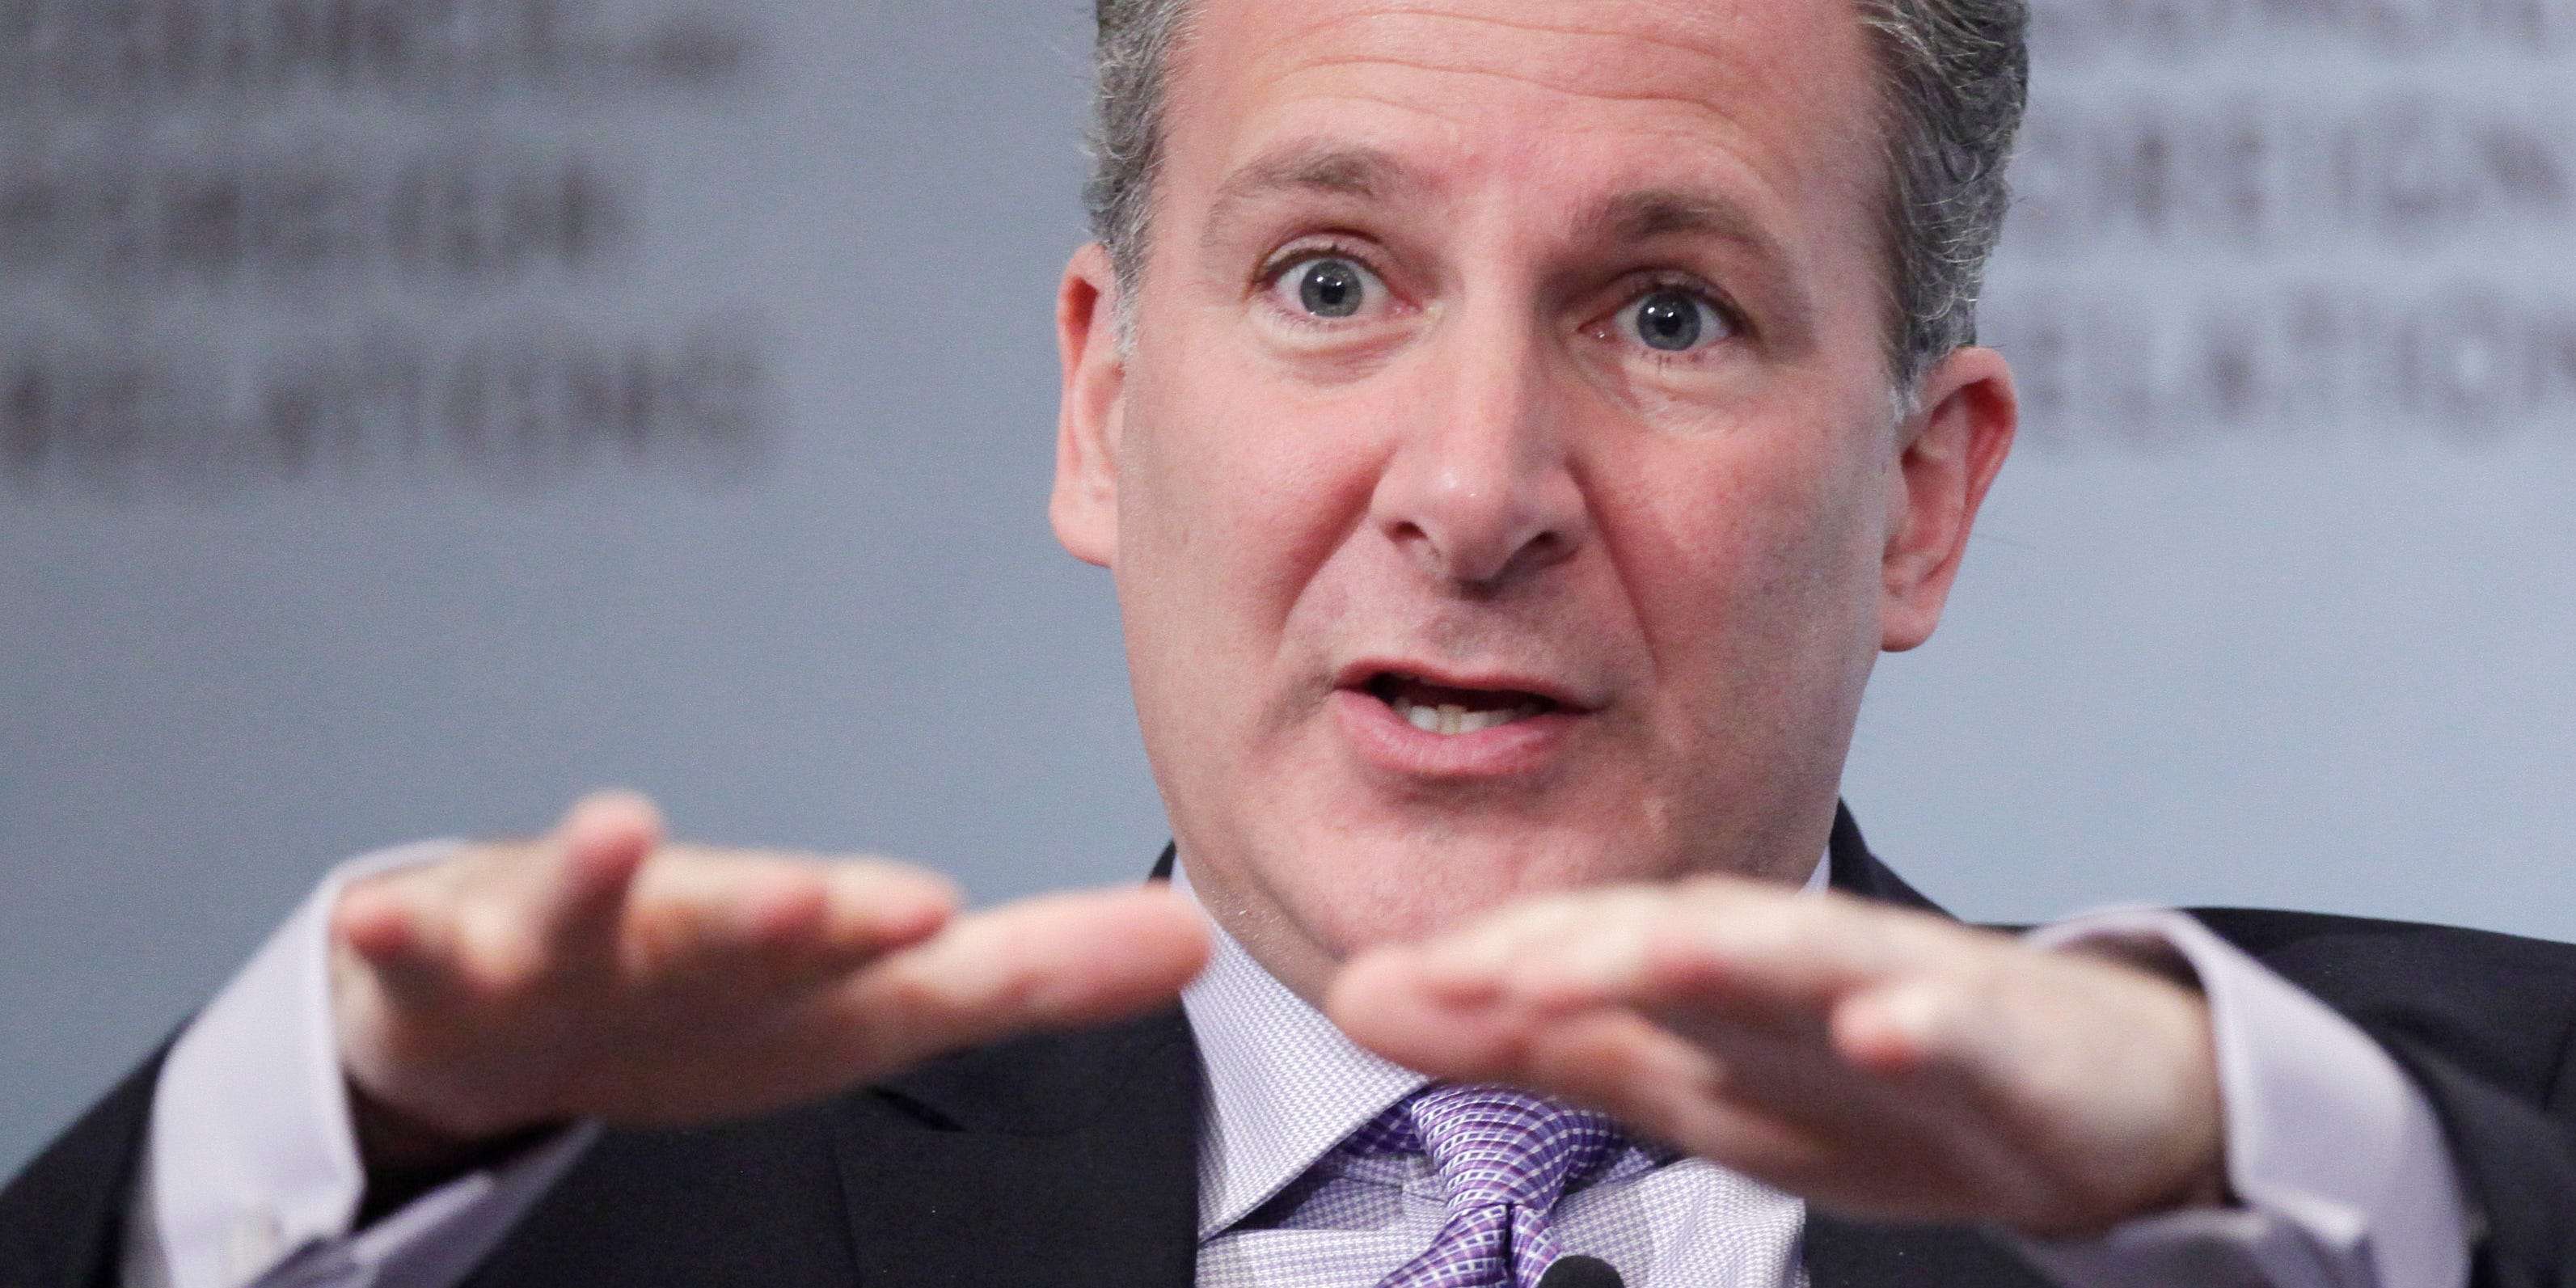 Bitcoin critic Peter Schiff trashed the cryptocurrency ...